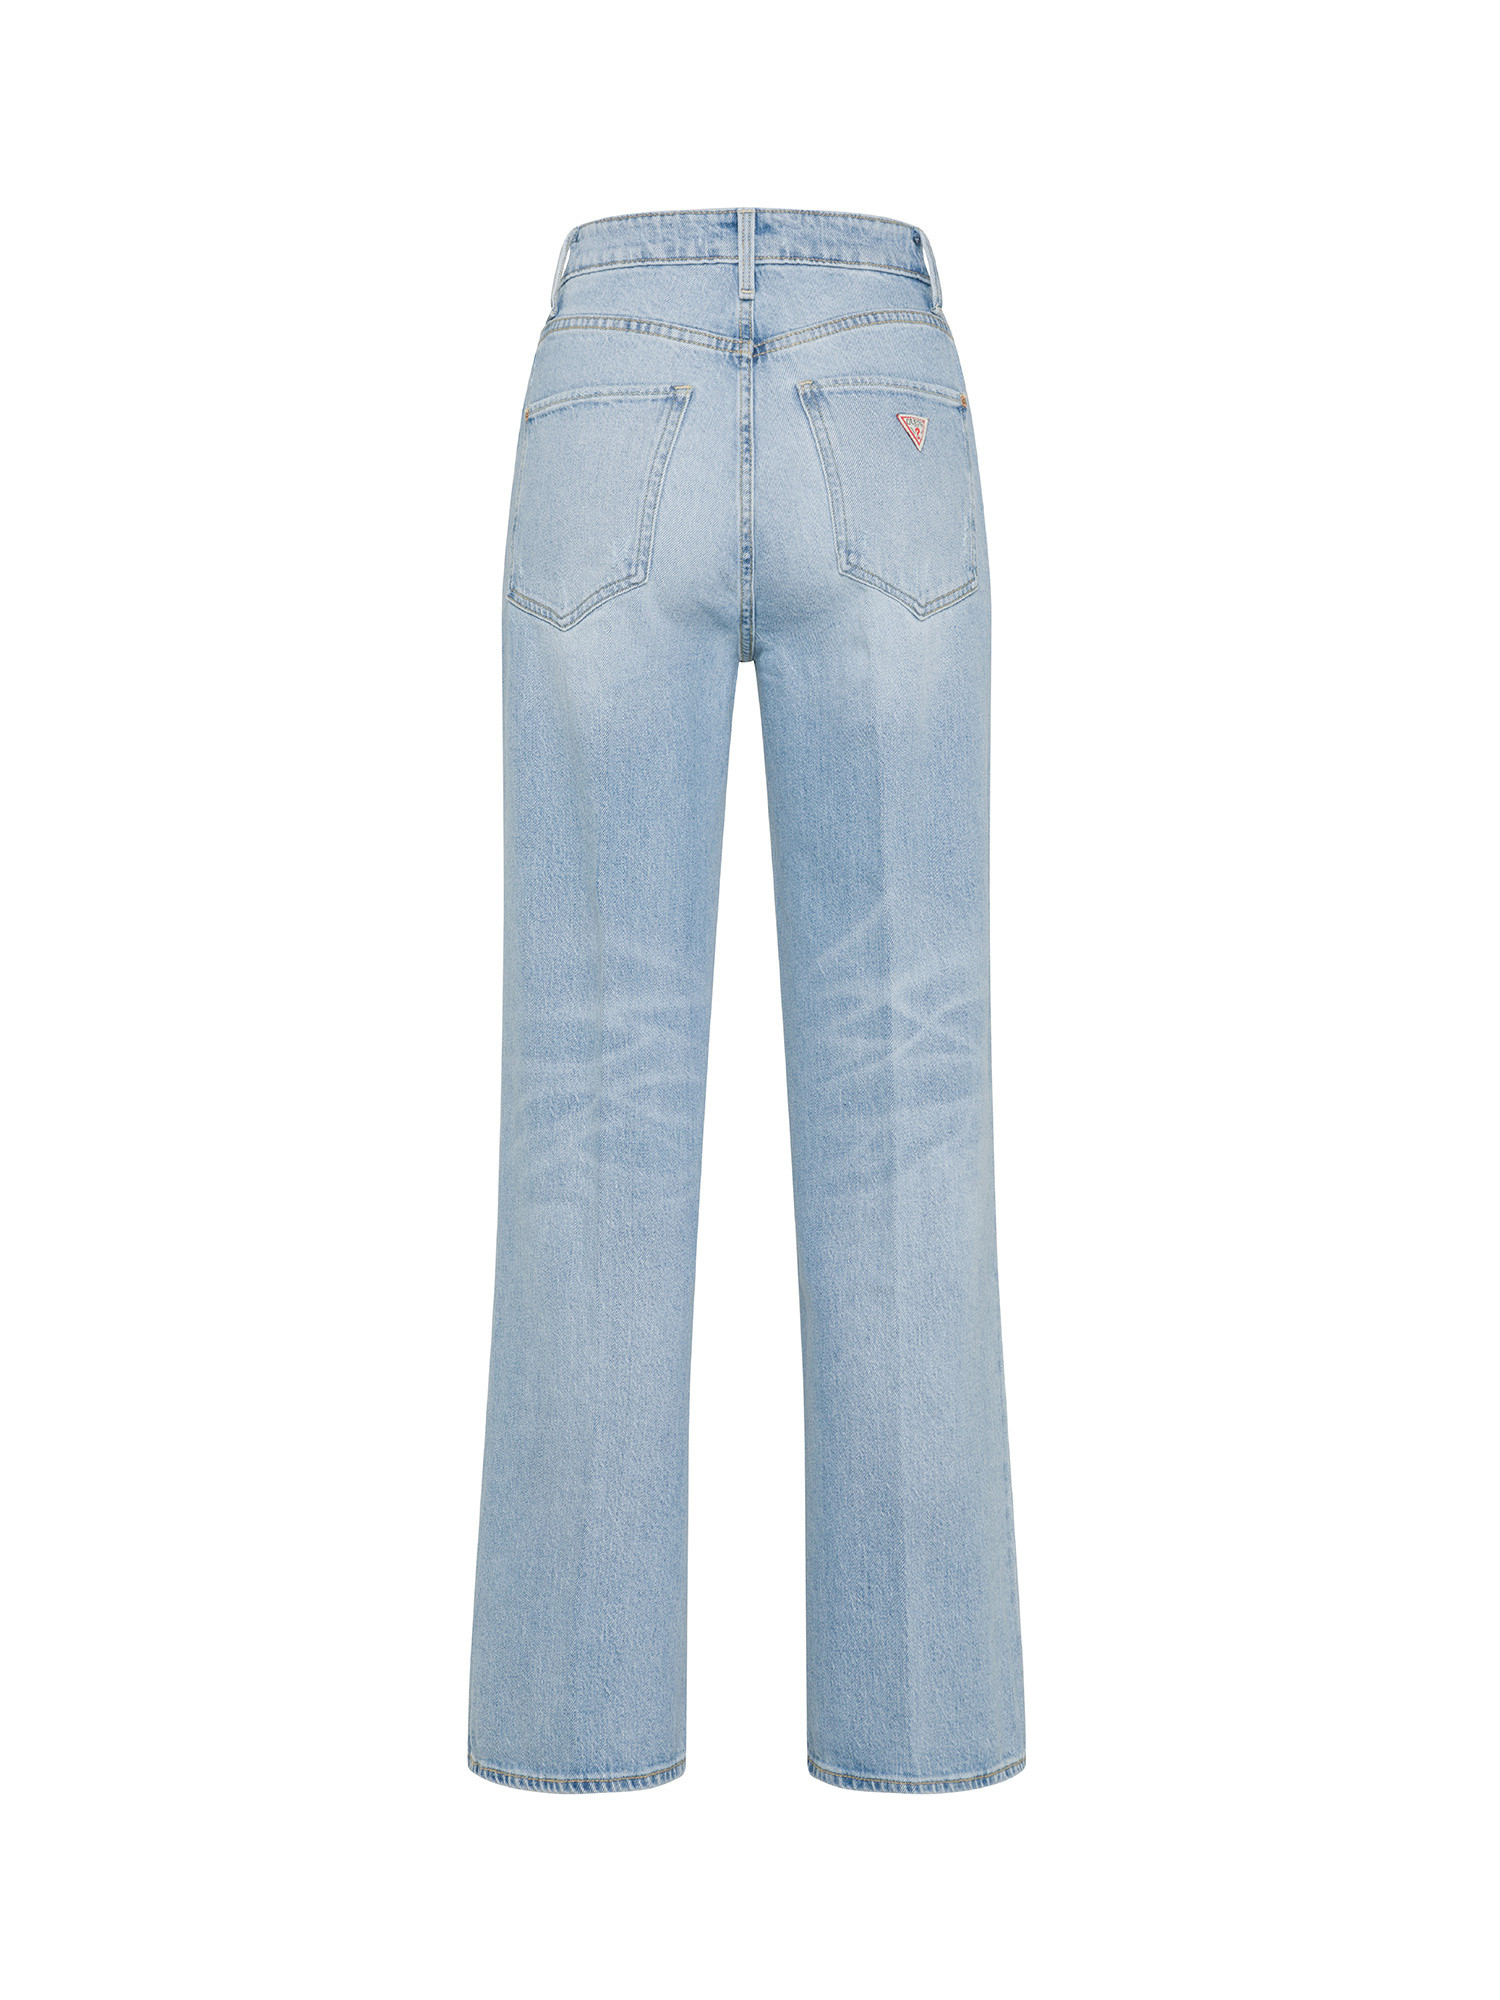 Trousers with 5 pockets, Blue, large image number 1